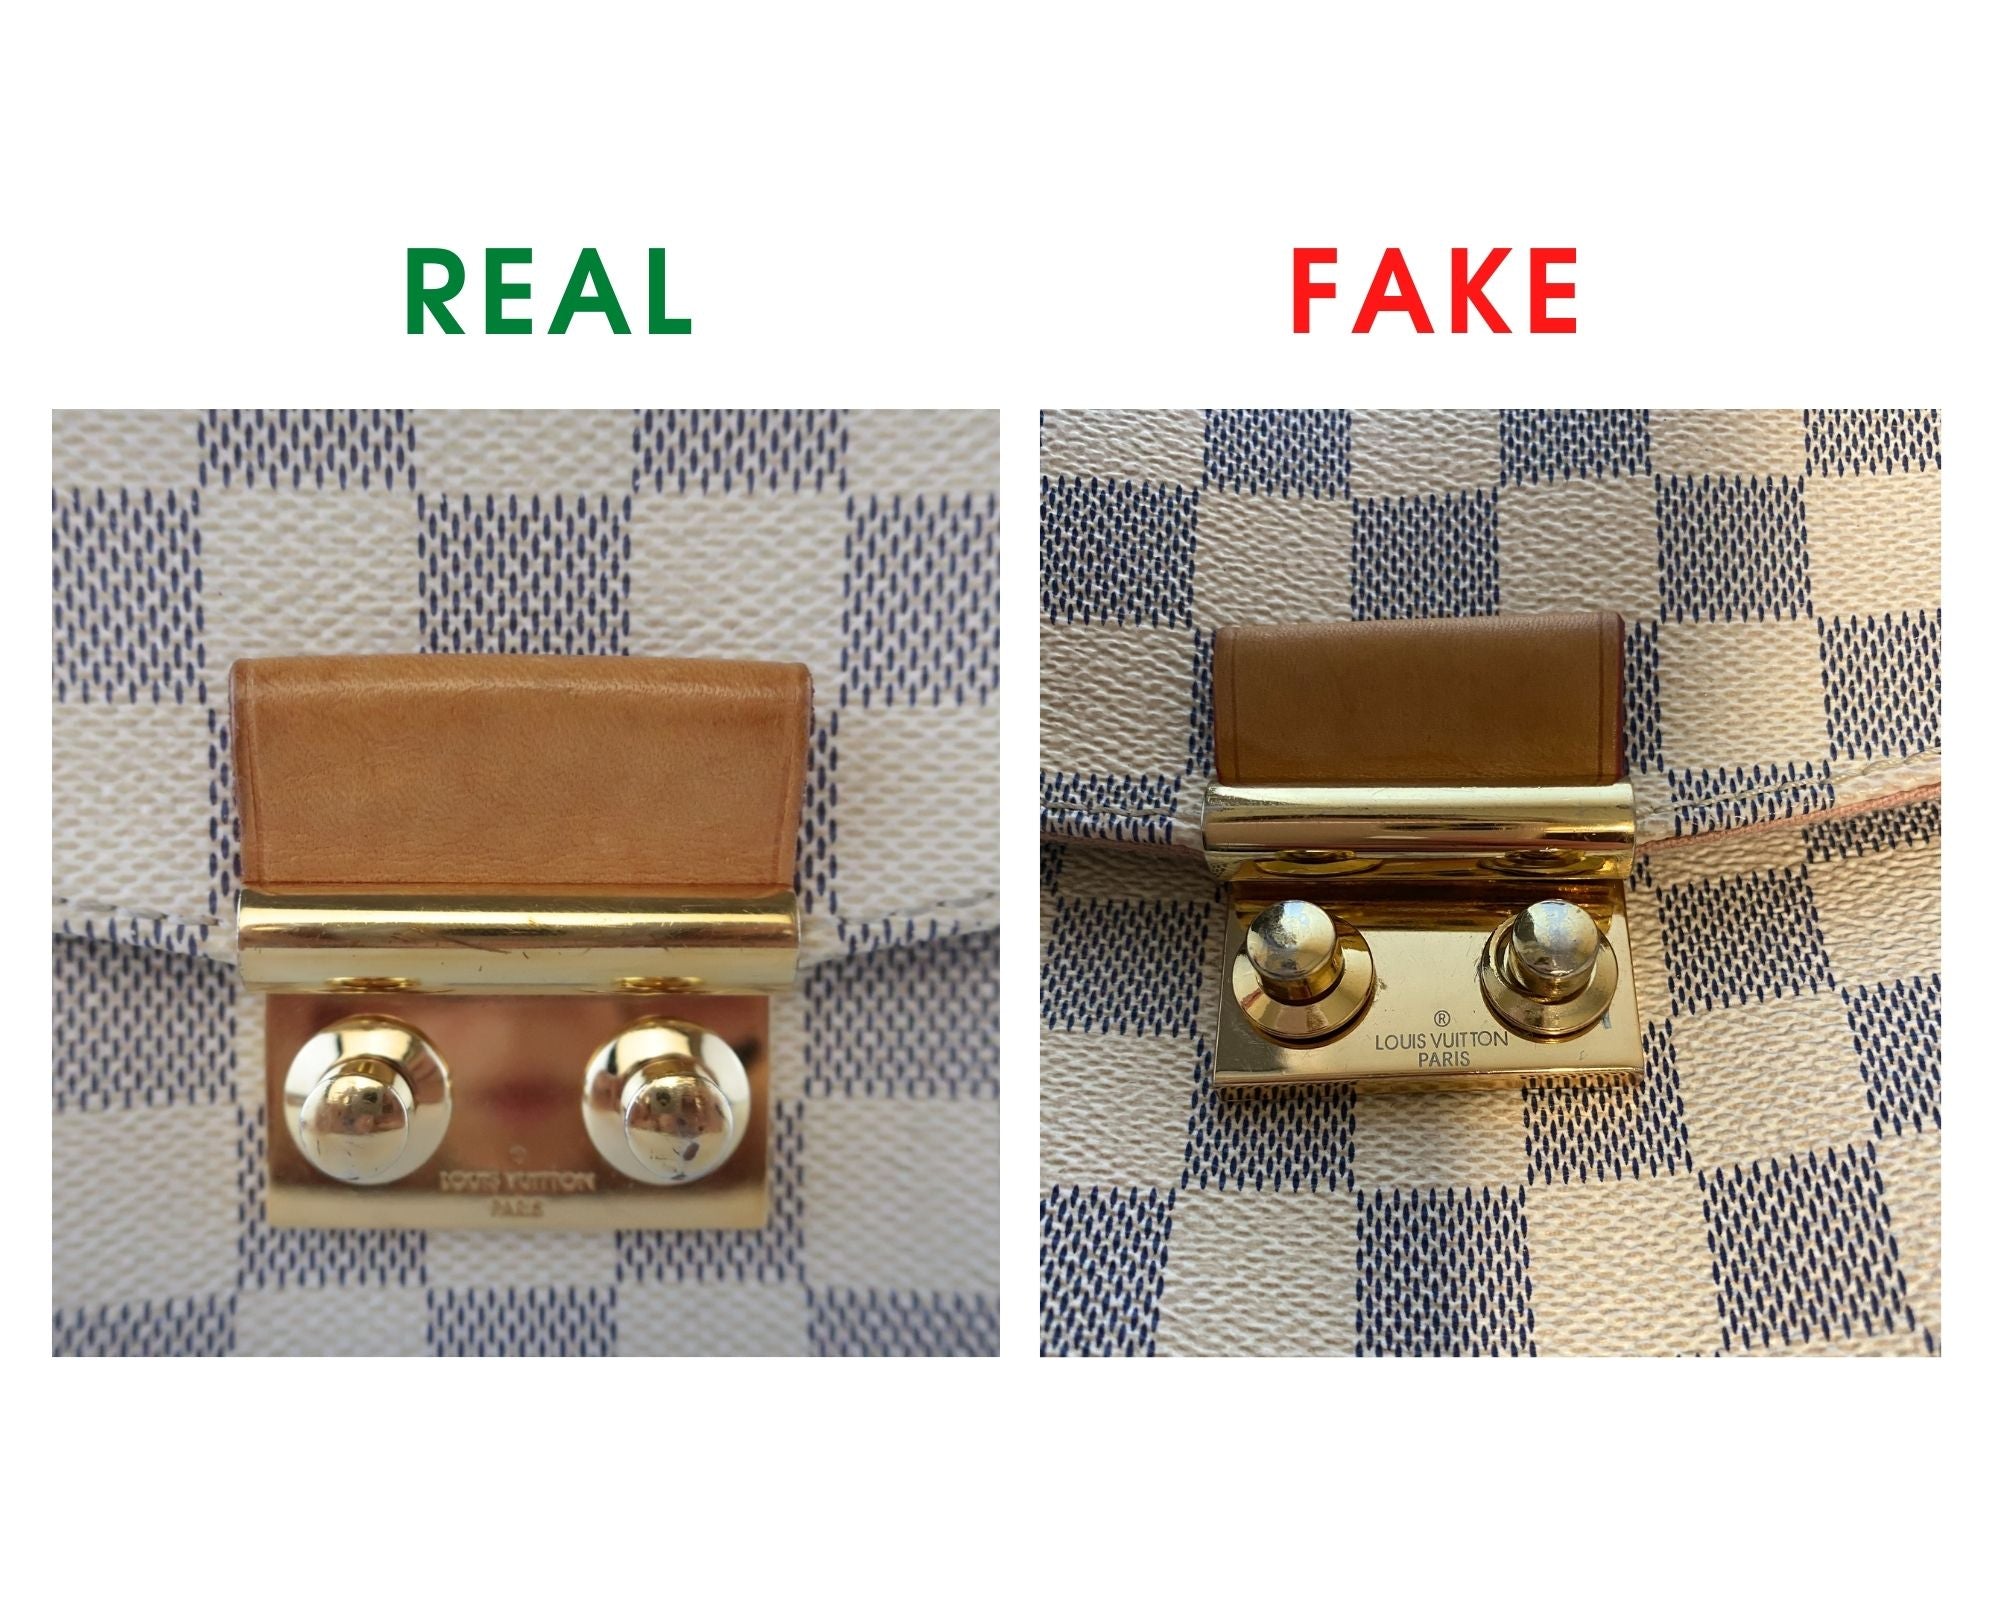 Louis Vuitton Croisette Bag Review and Real vs Fake Comparison (With R –  Bagaholic